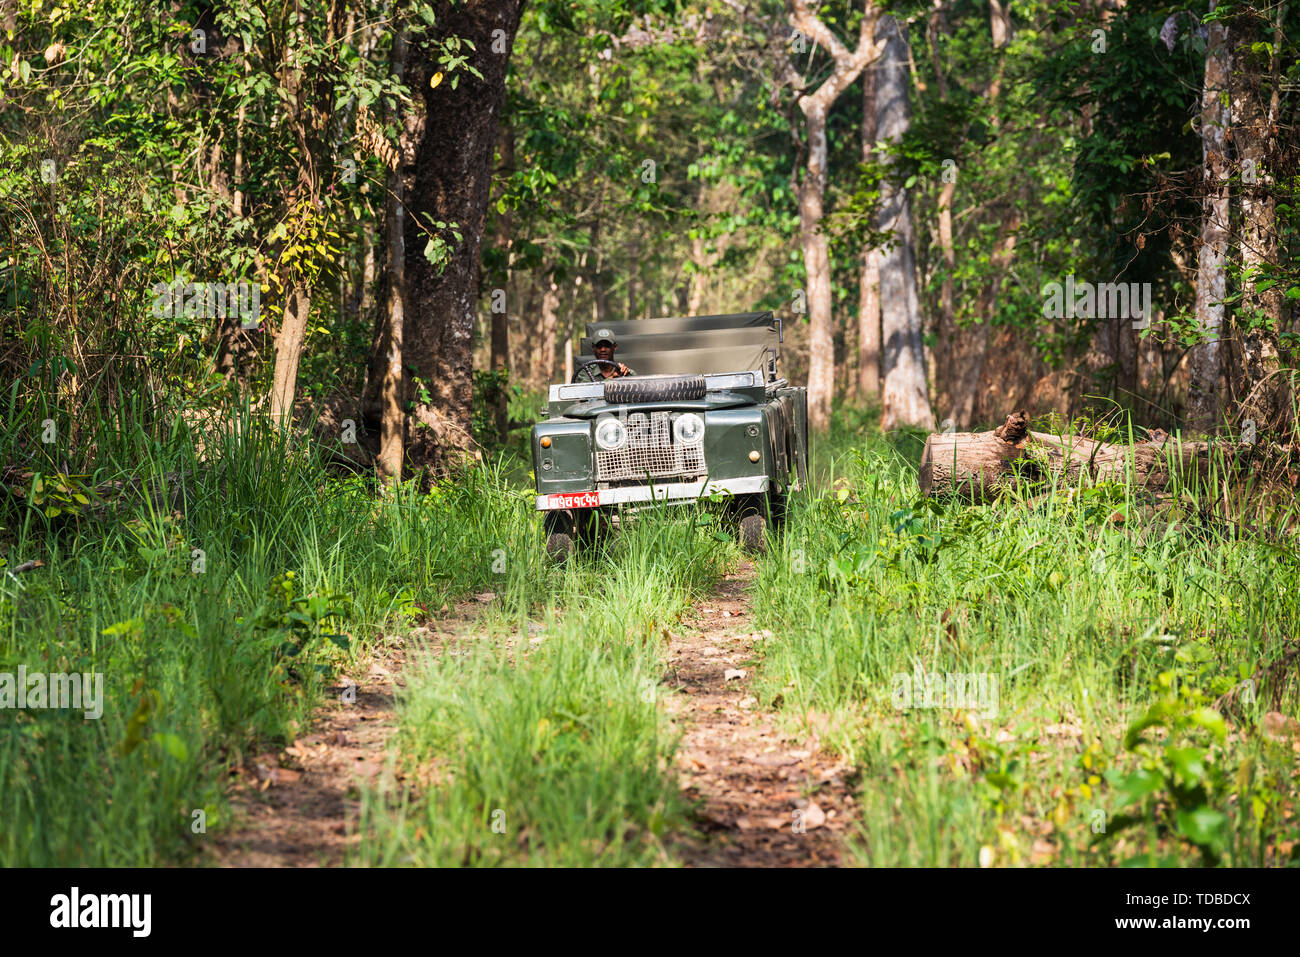 CHITWAN NATIONAL PARK, NEPAL - CIRCA MAY2019: A vintage Land Rover Series II is being driven in Chitwan National Park jungle. The car has been modifie Stock Photo